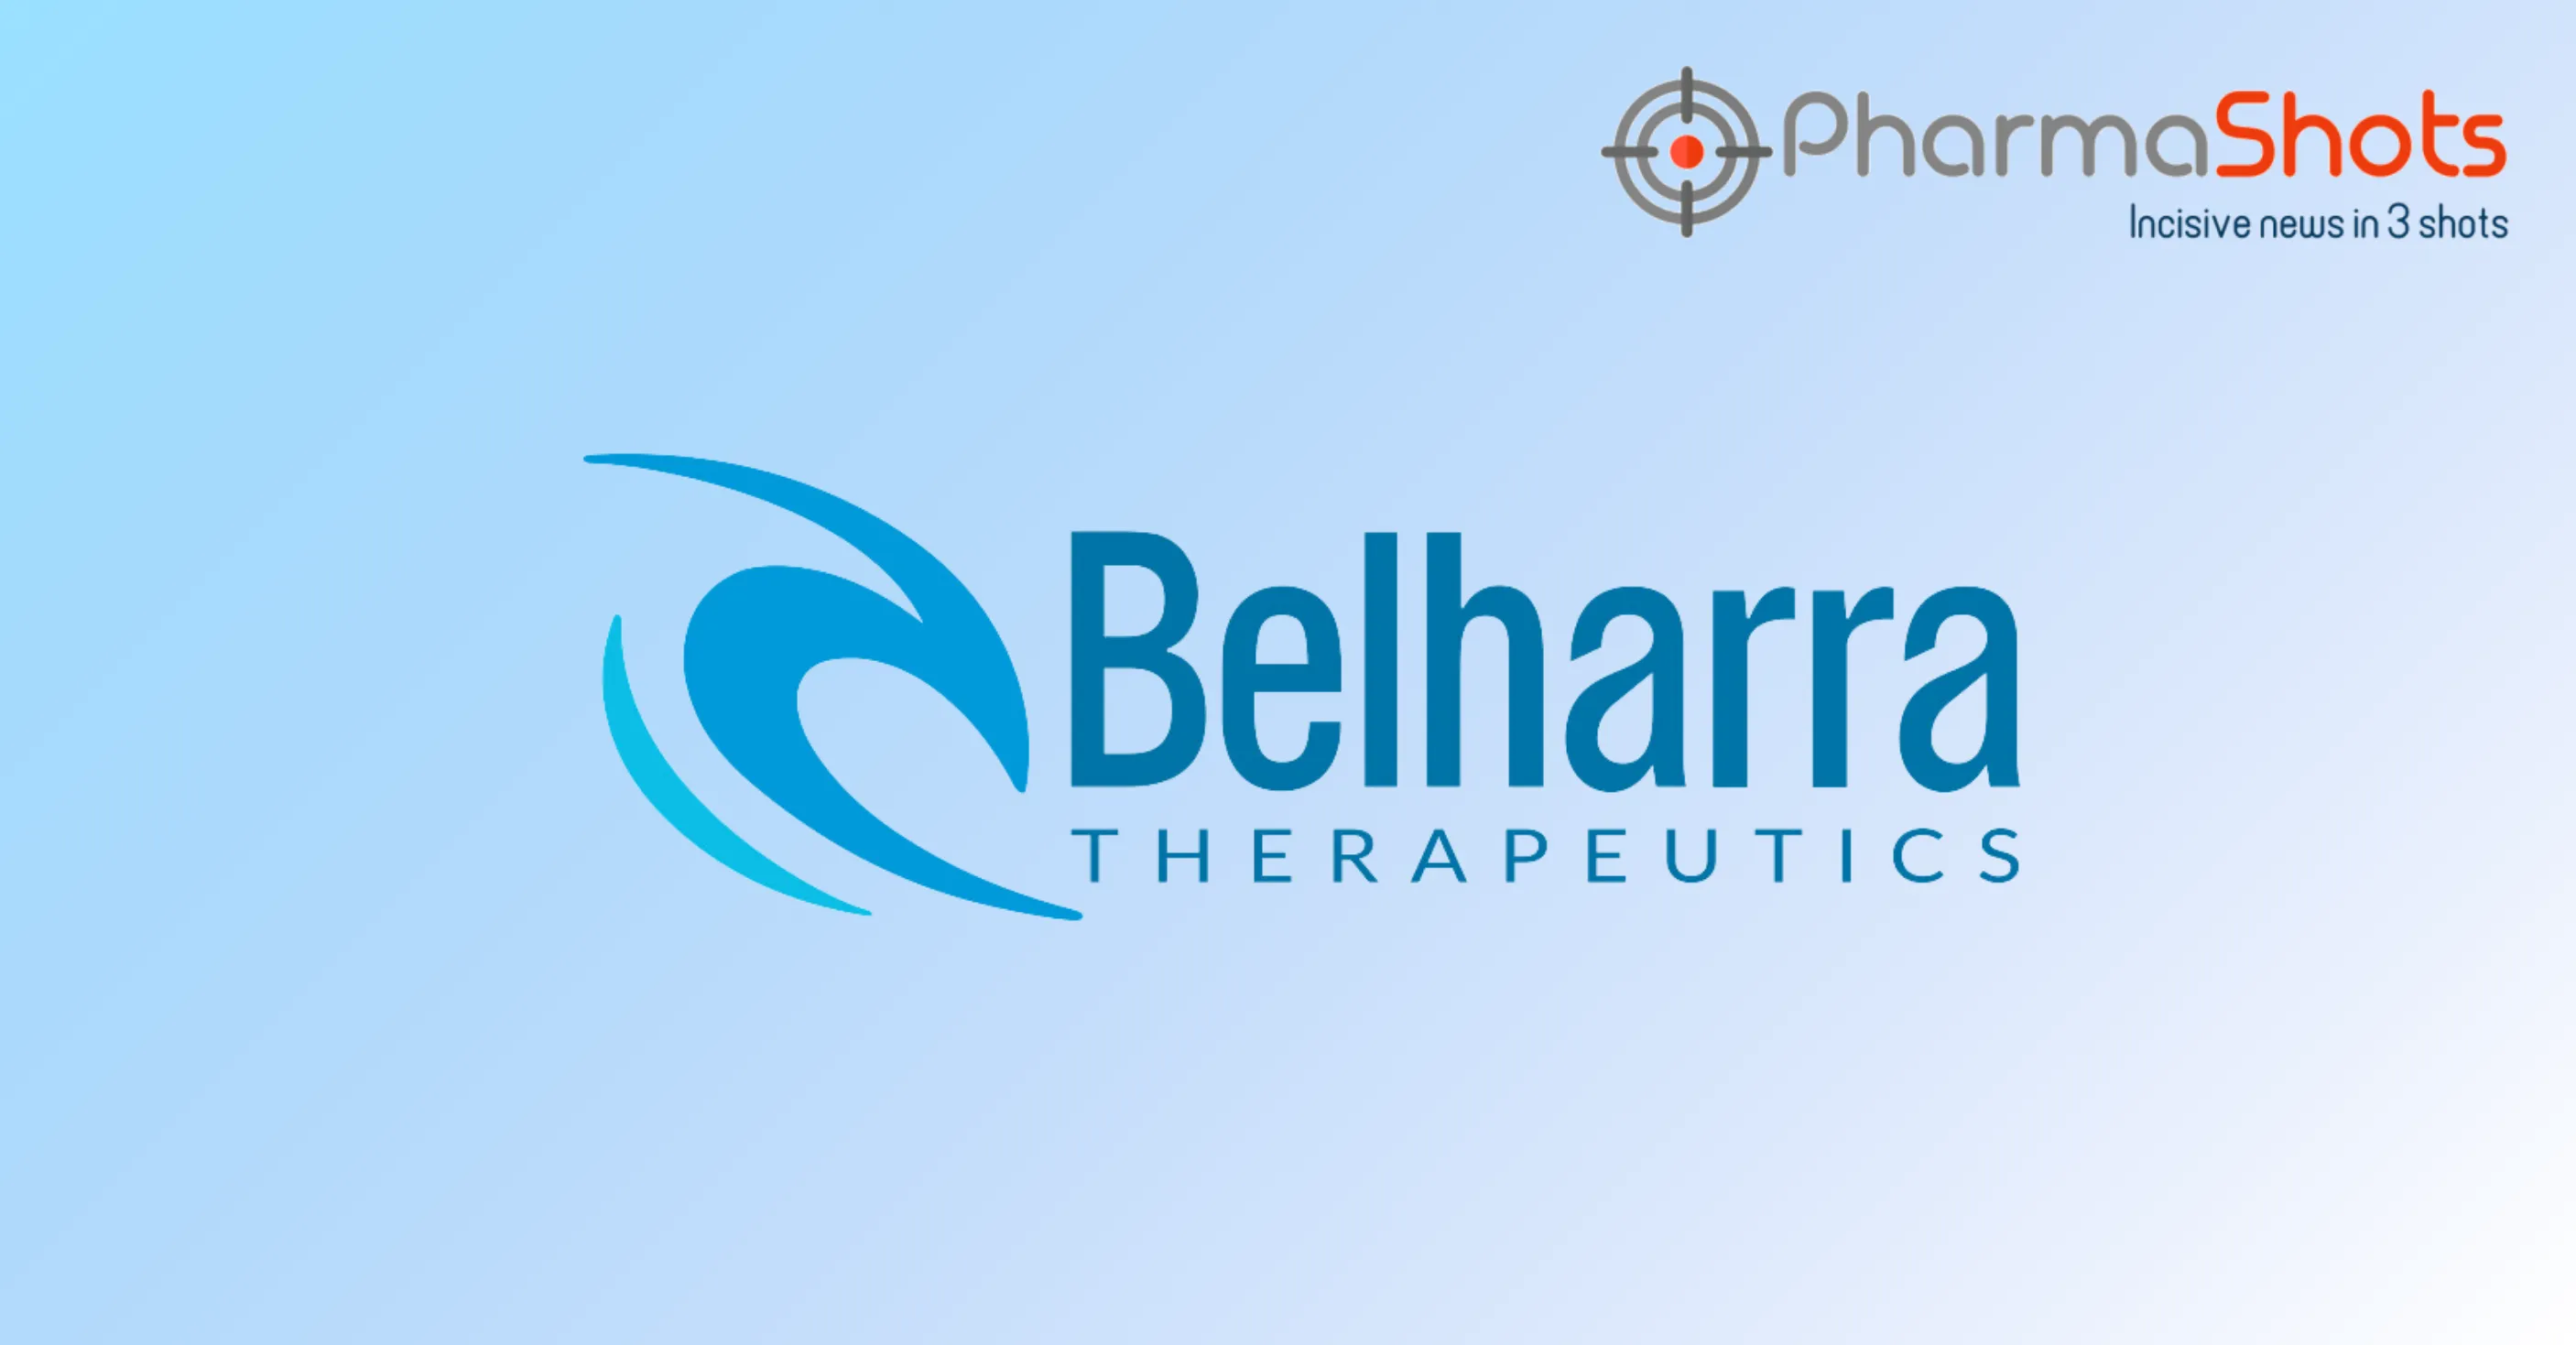 Belharra Therapeutics Partners with Sanofi to Discover New Small Molecules Addressing Immunological Diseases